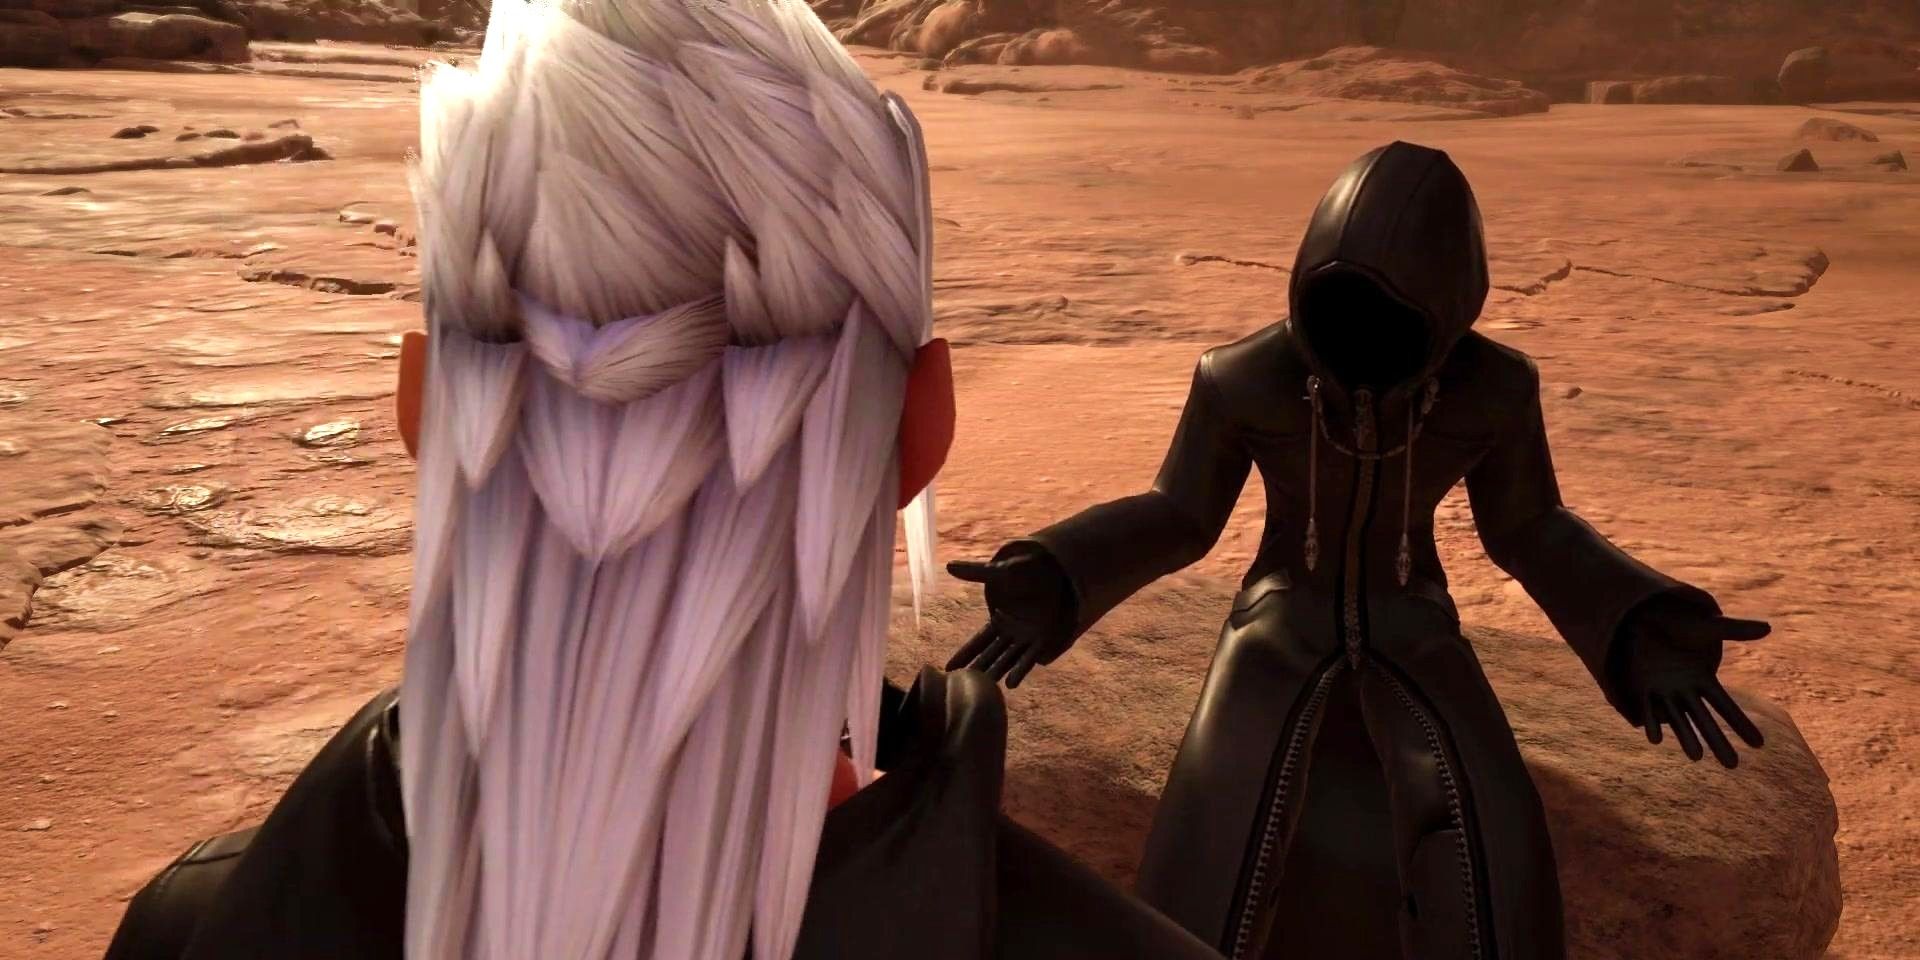 Kingdom Hearts’ Master of Masters Explained and Where The Series Could Go Next